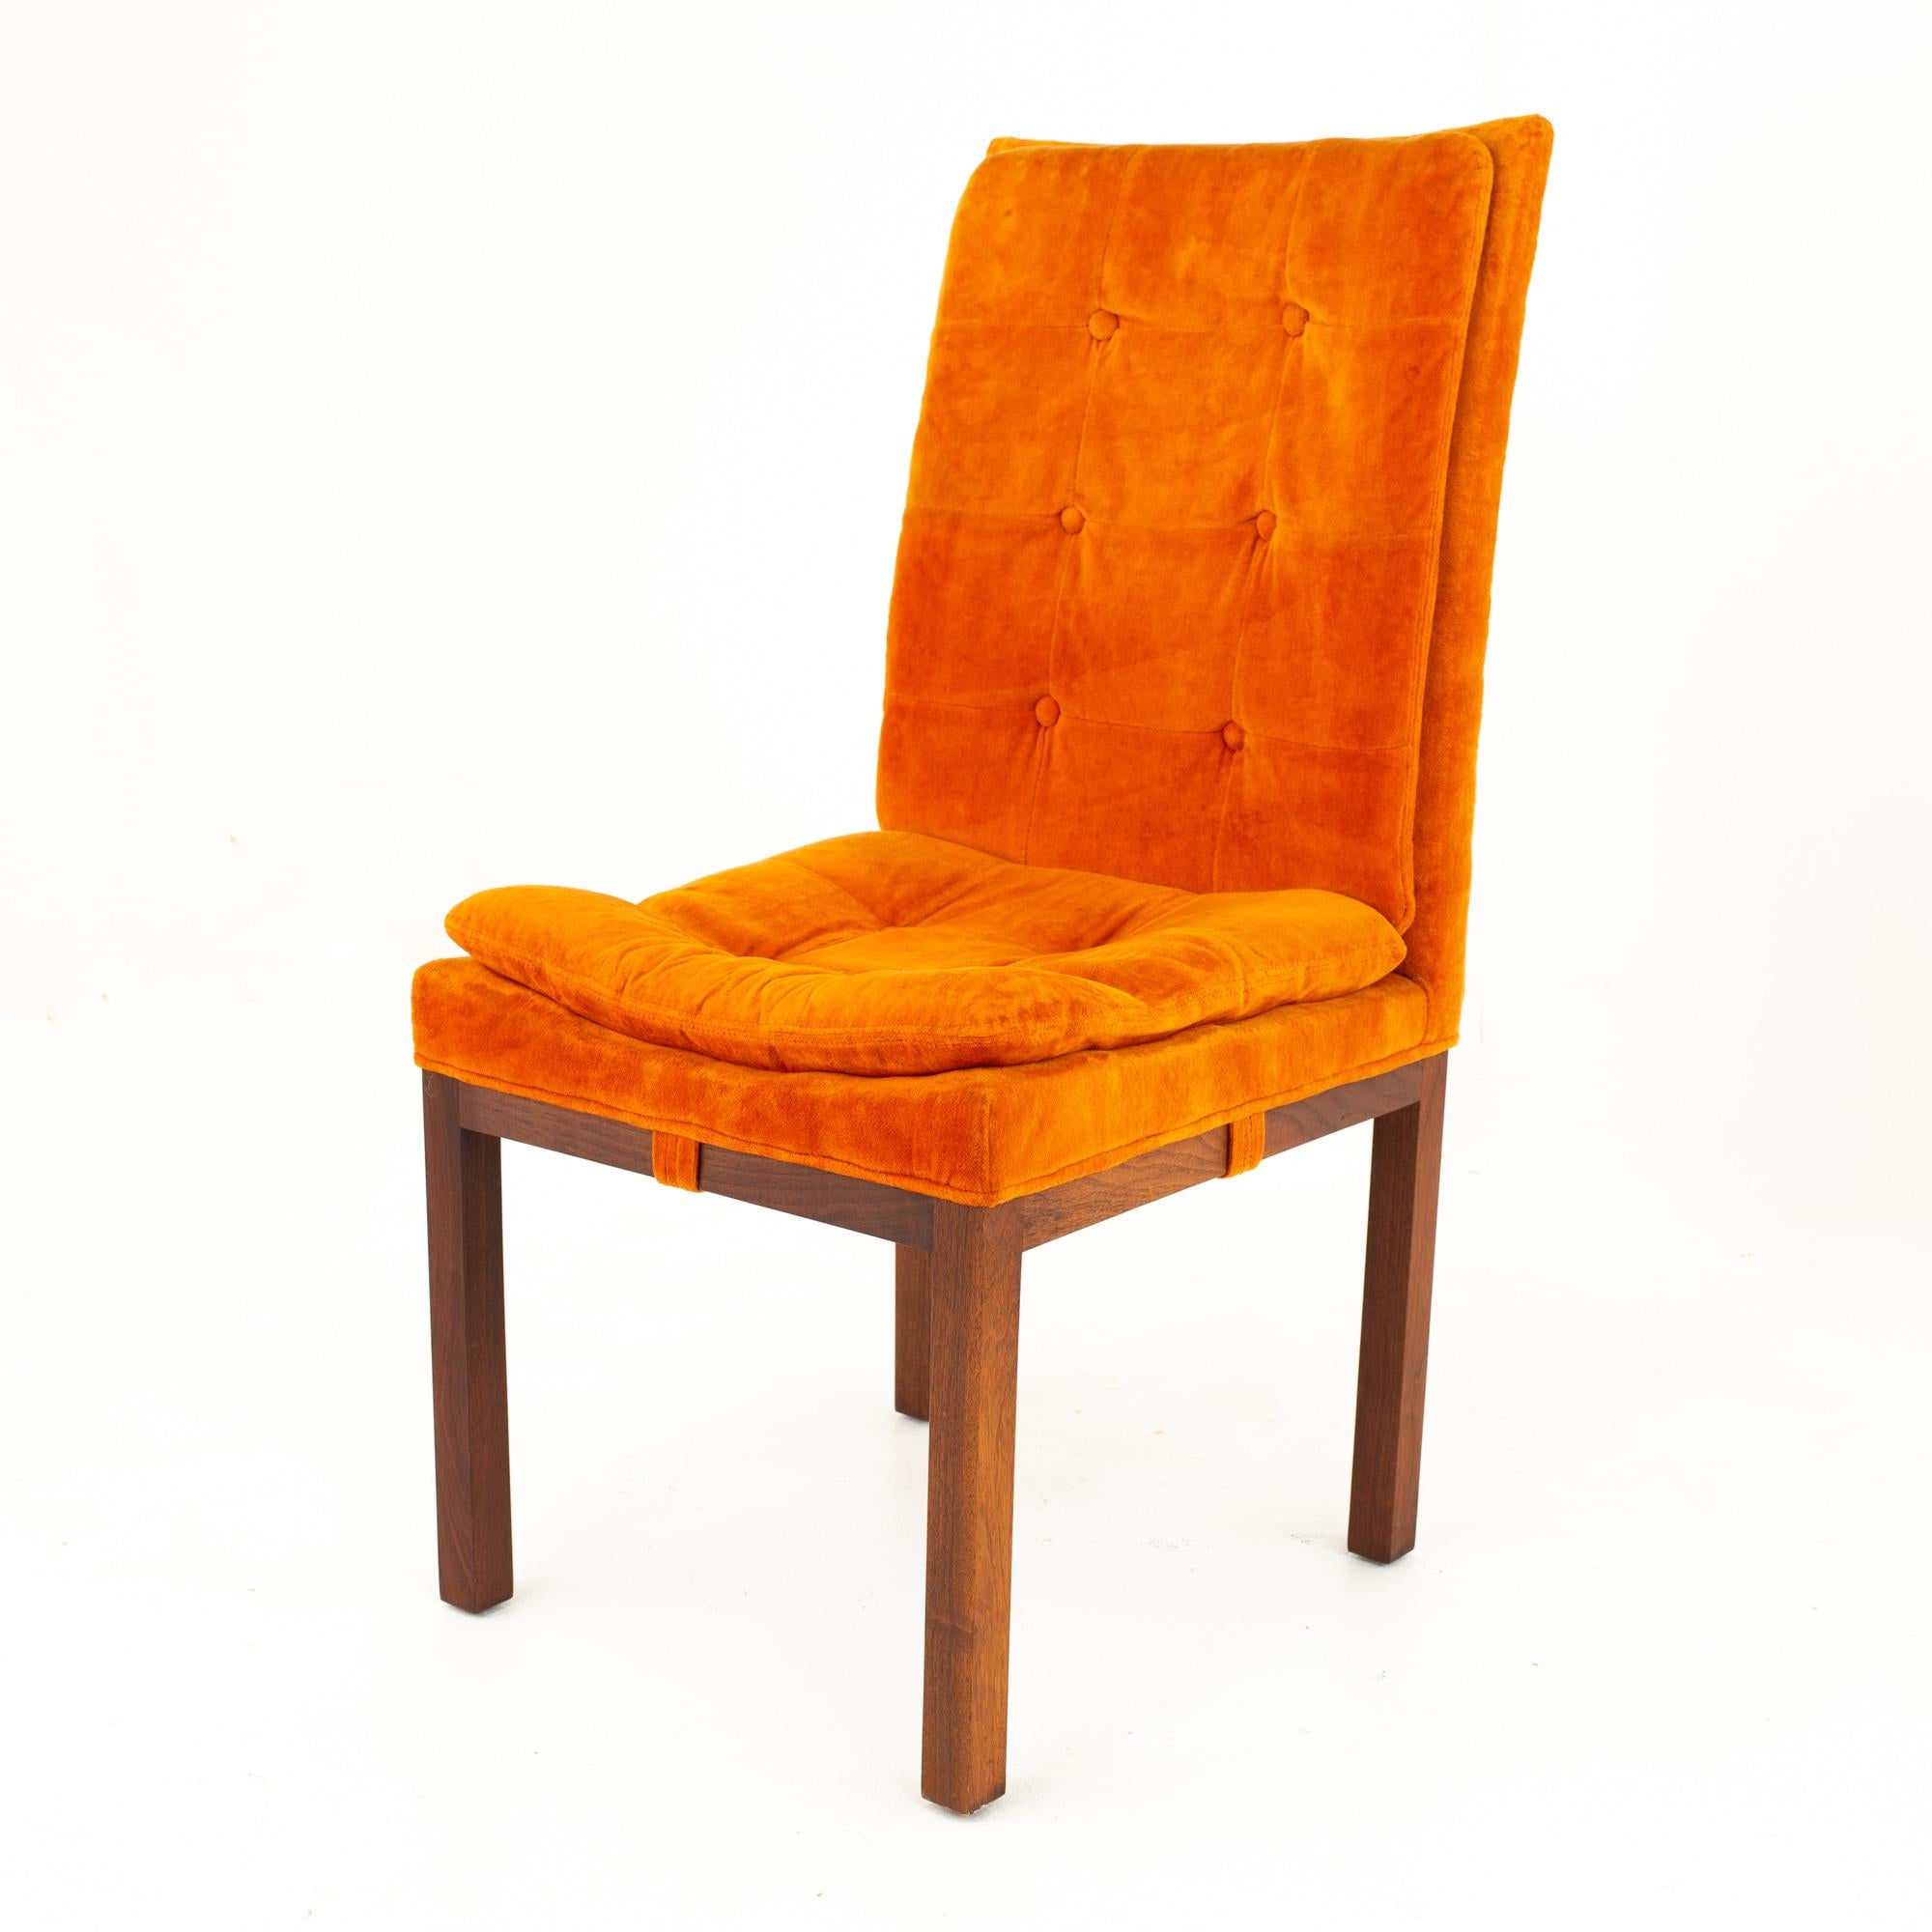 Milo Baughman Style Dillingham Orange and Walnut Upholstered Dining Chairs - Set 7